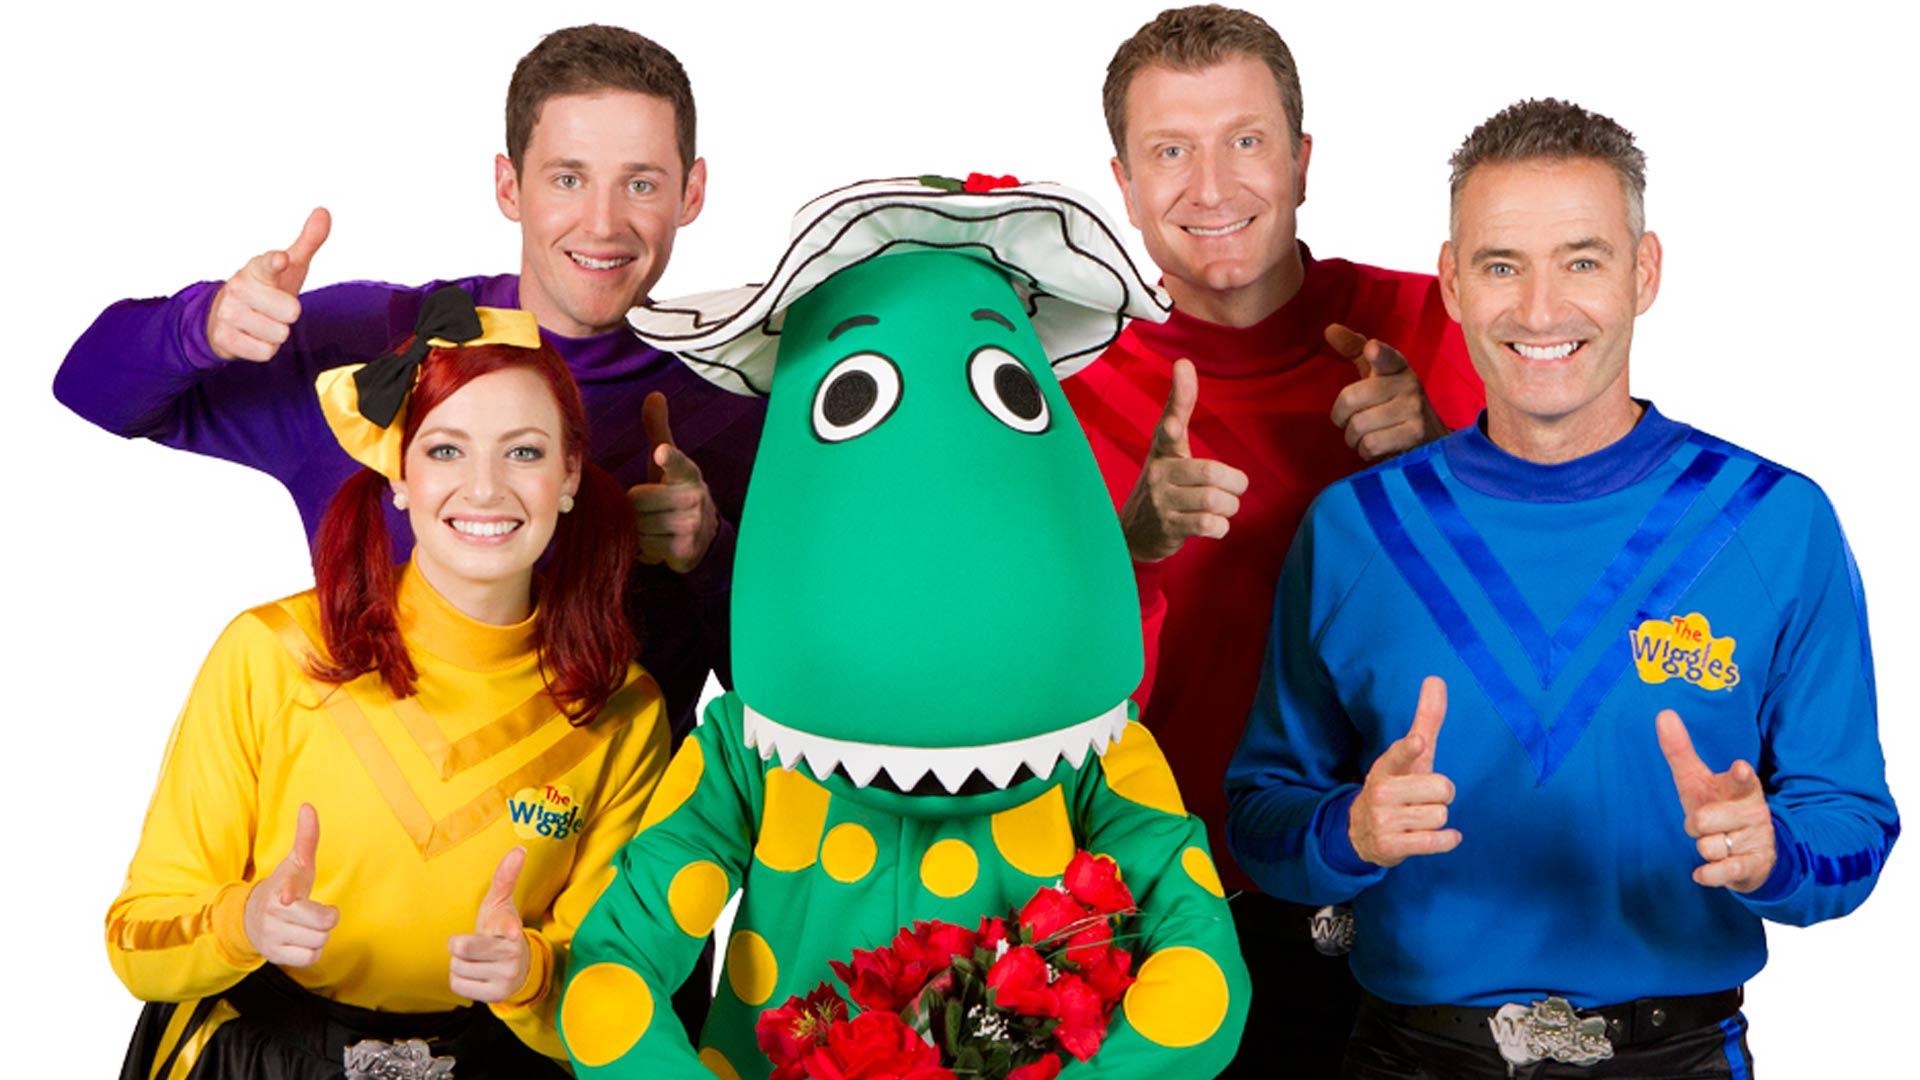 The Wiggles Wallpapers image image